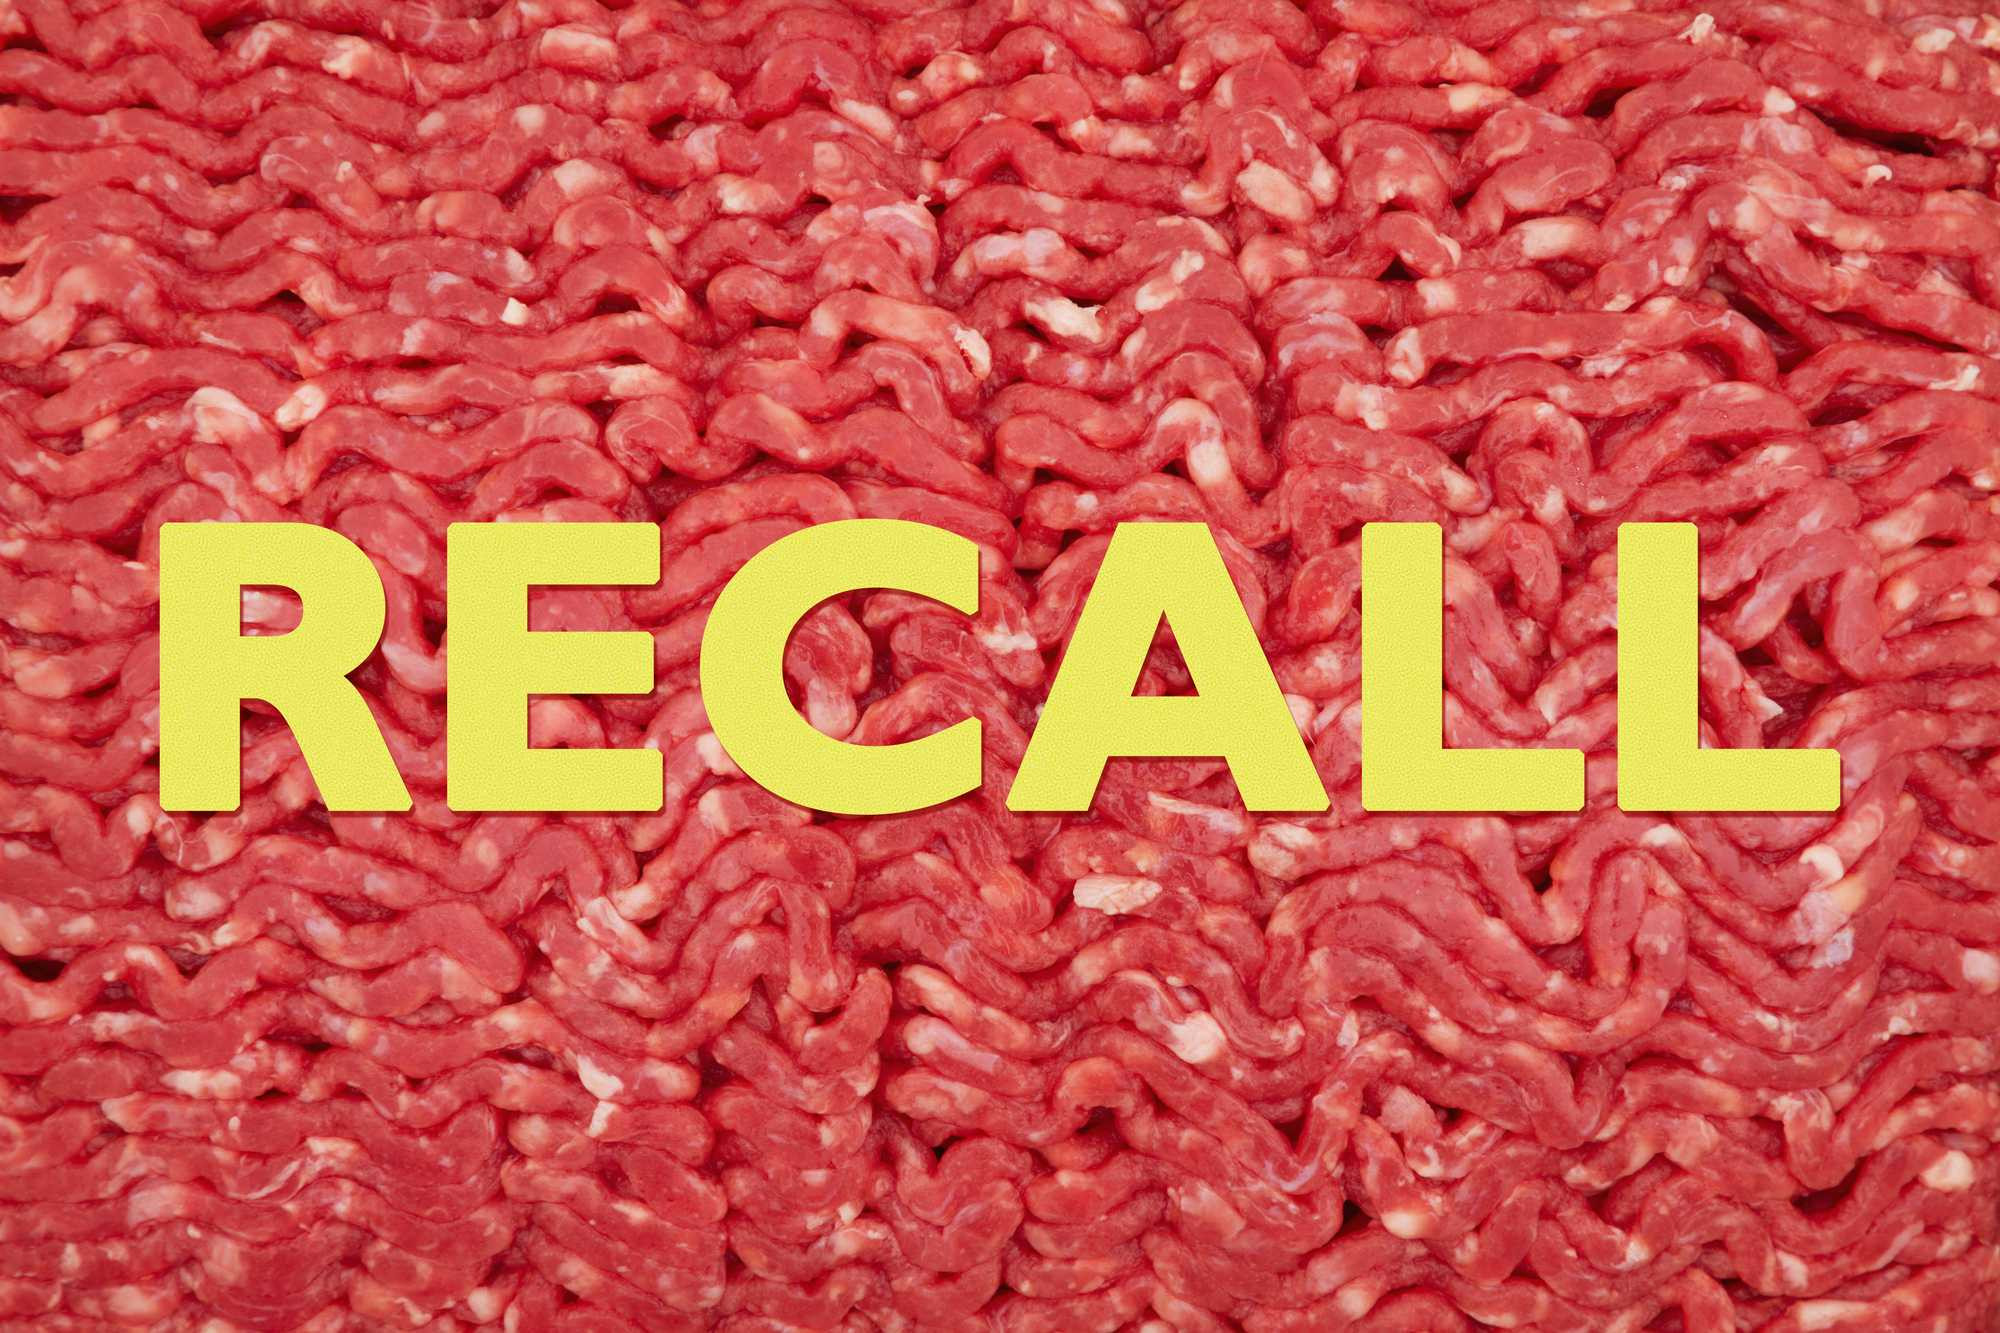 The Best Recalled Ground Beef Best Recipes Ideas and Collections